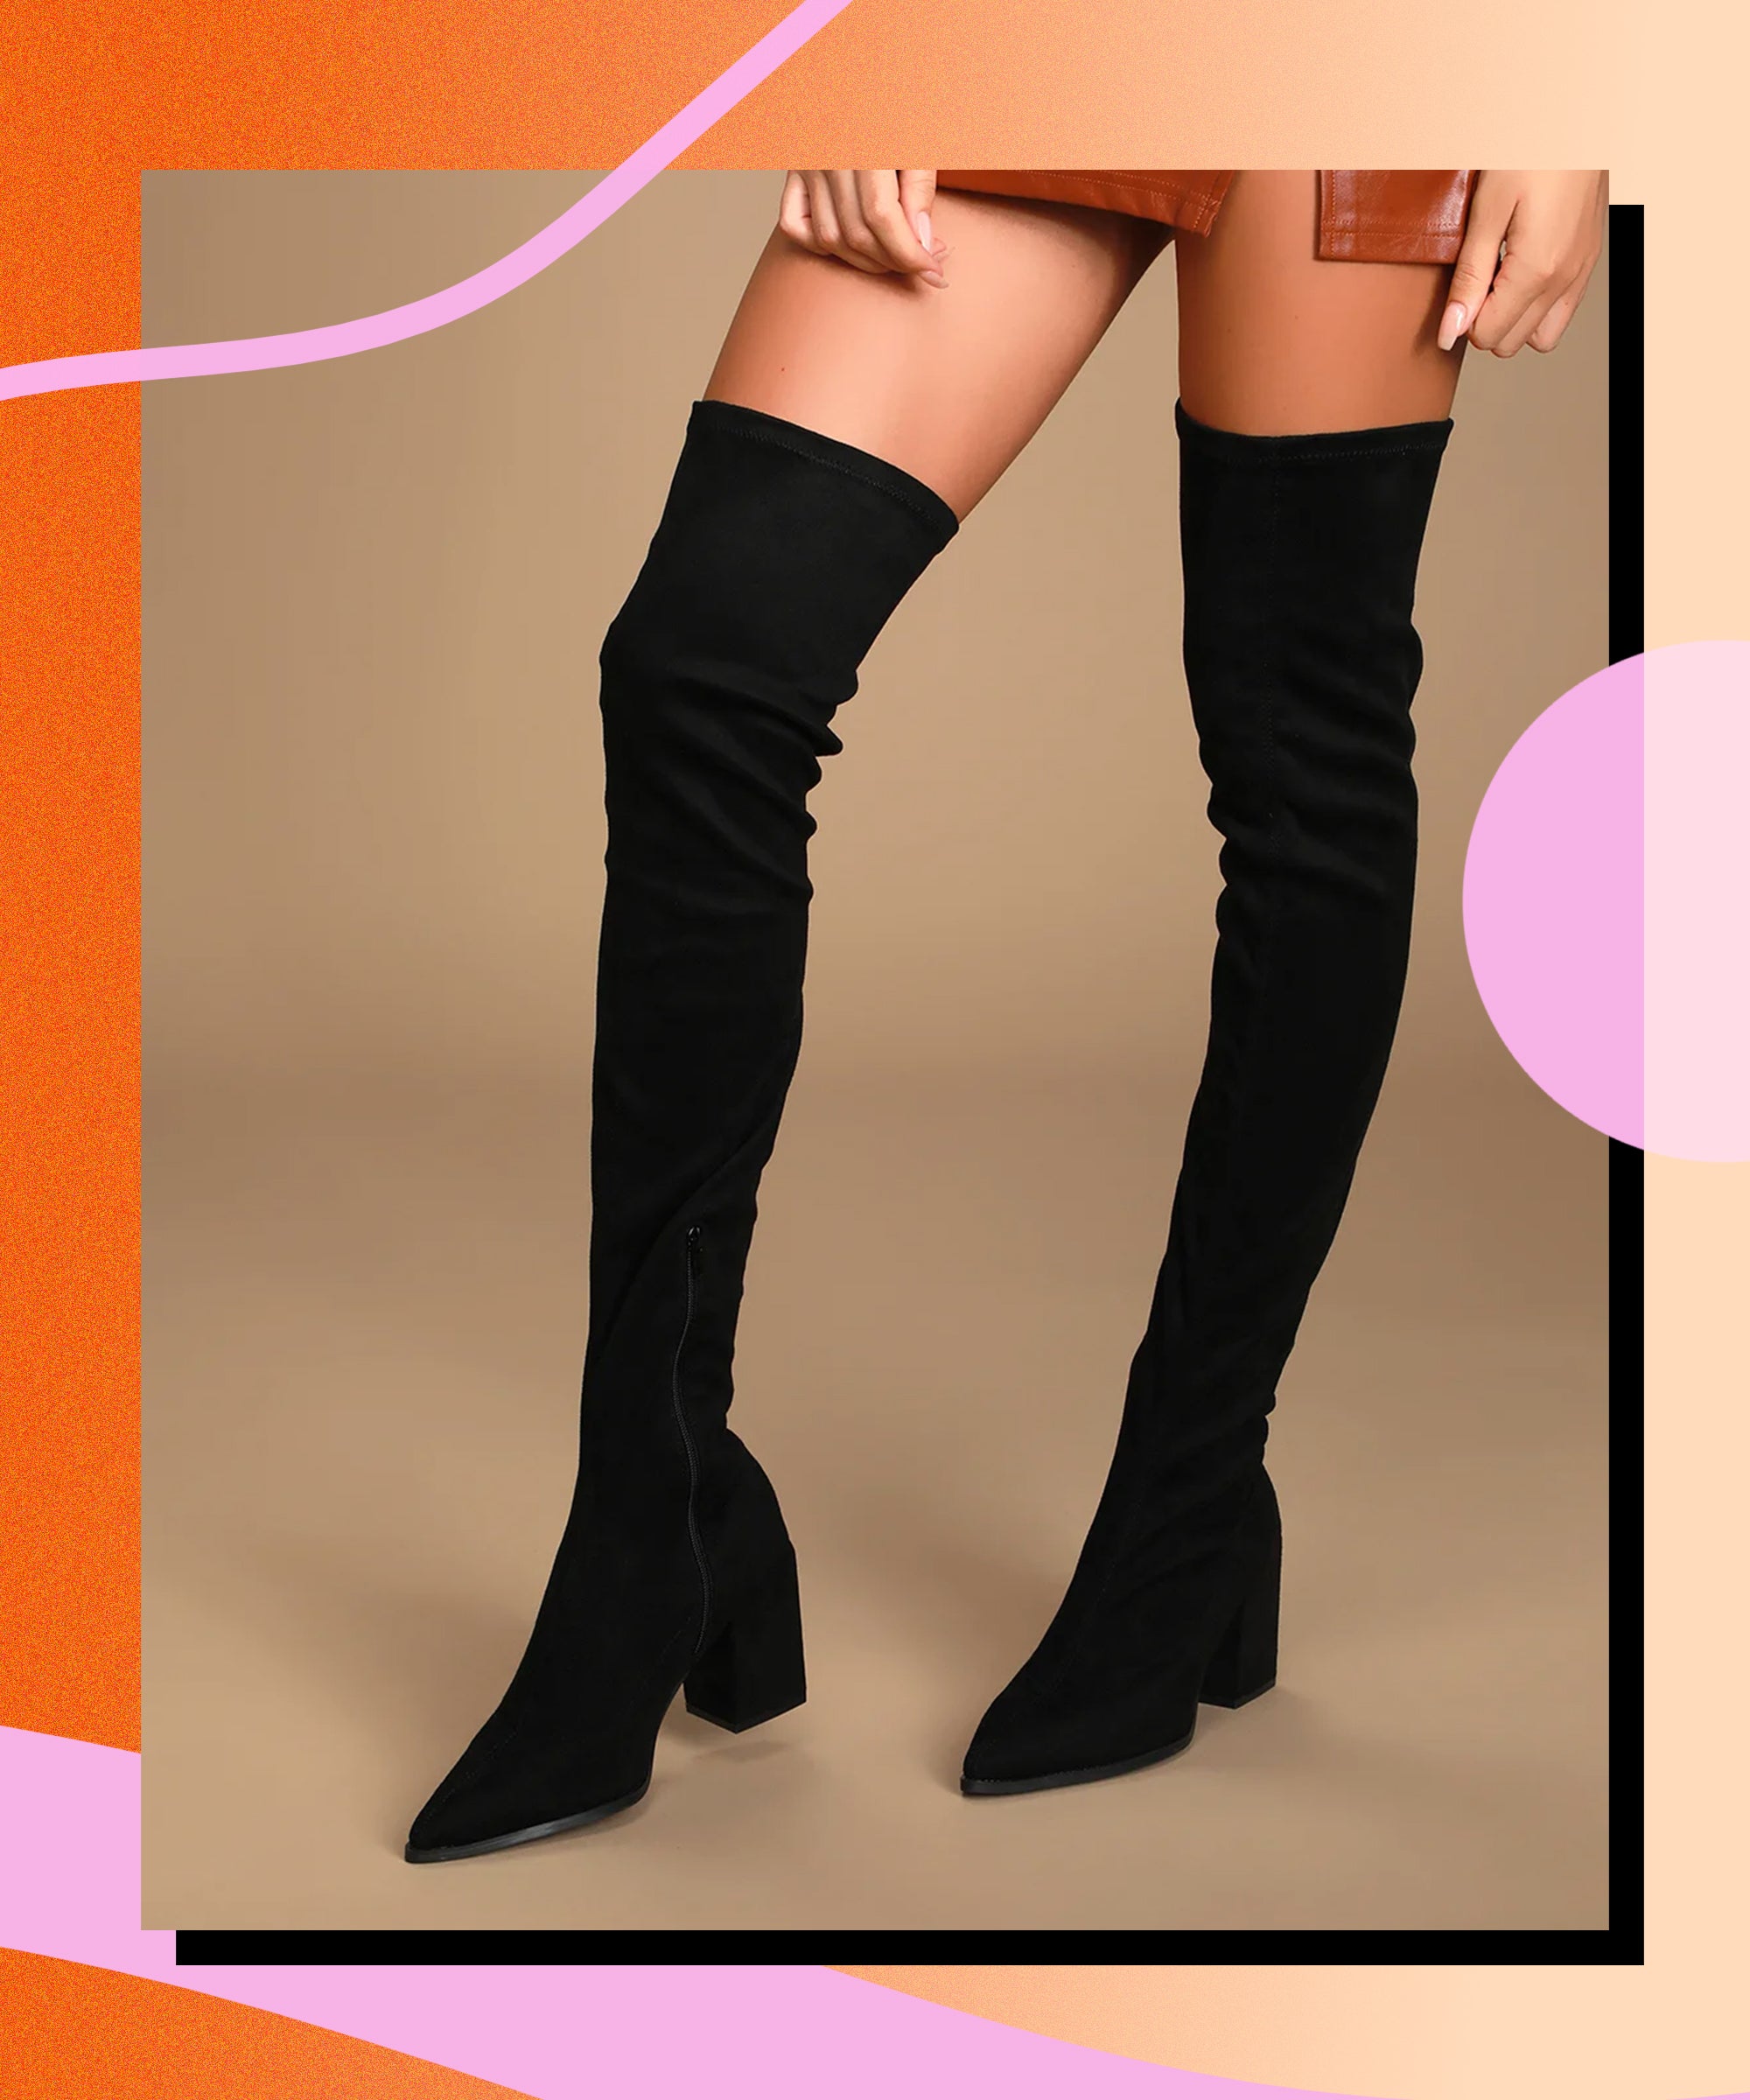 alan gara recommends pictures of thigh high boots pic